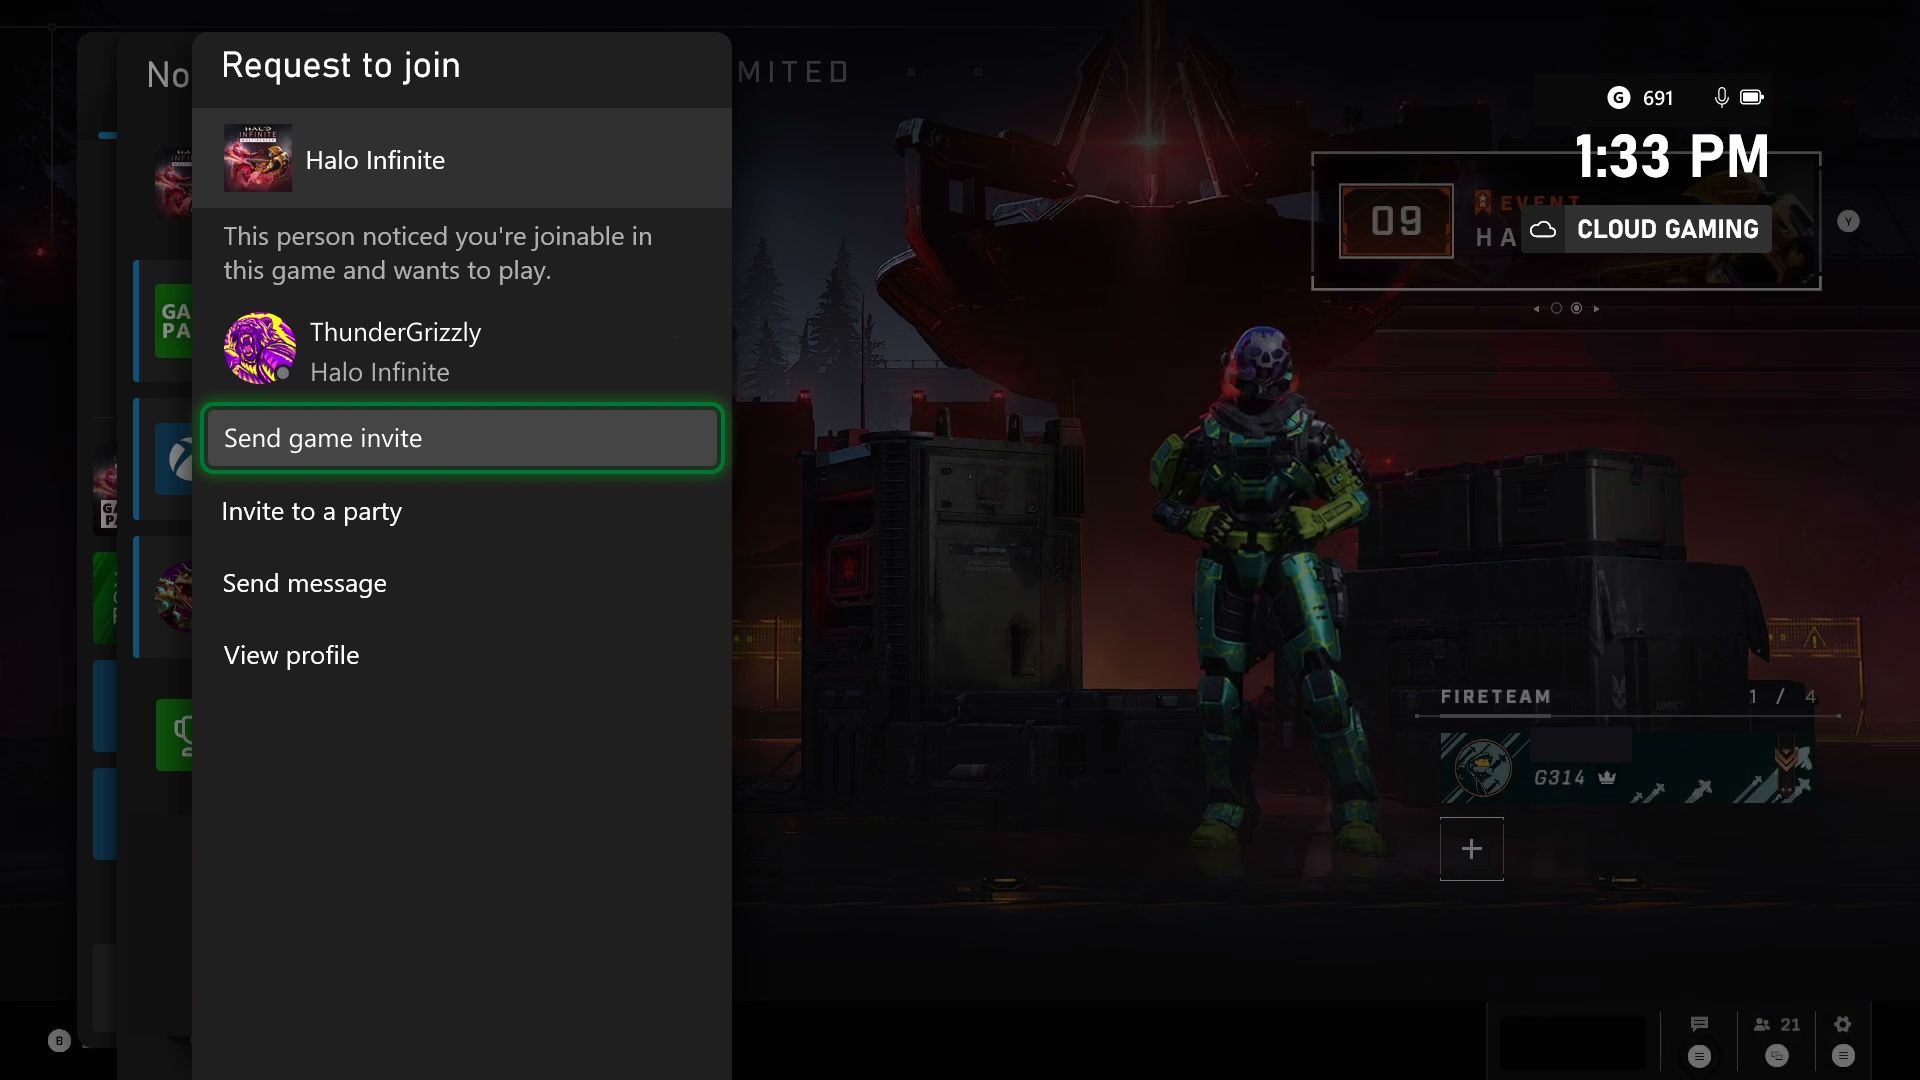 Connect Your Worlds – Discord Voice Chat Comes to Xbox Consoles for Xbox  Insiders - Xbox Wire